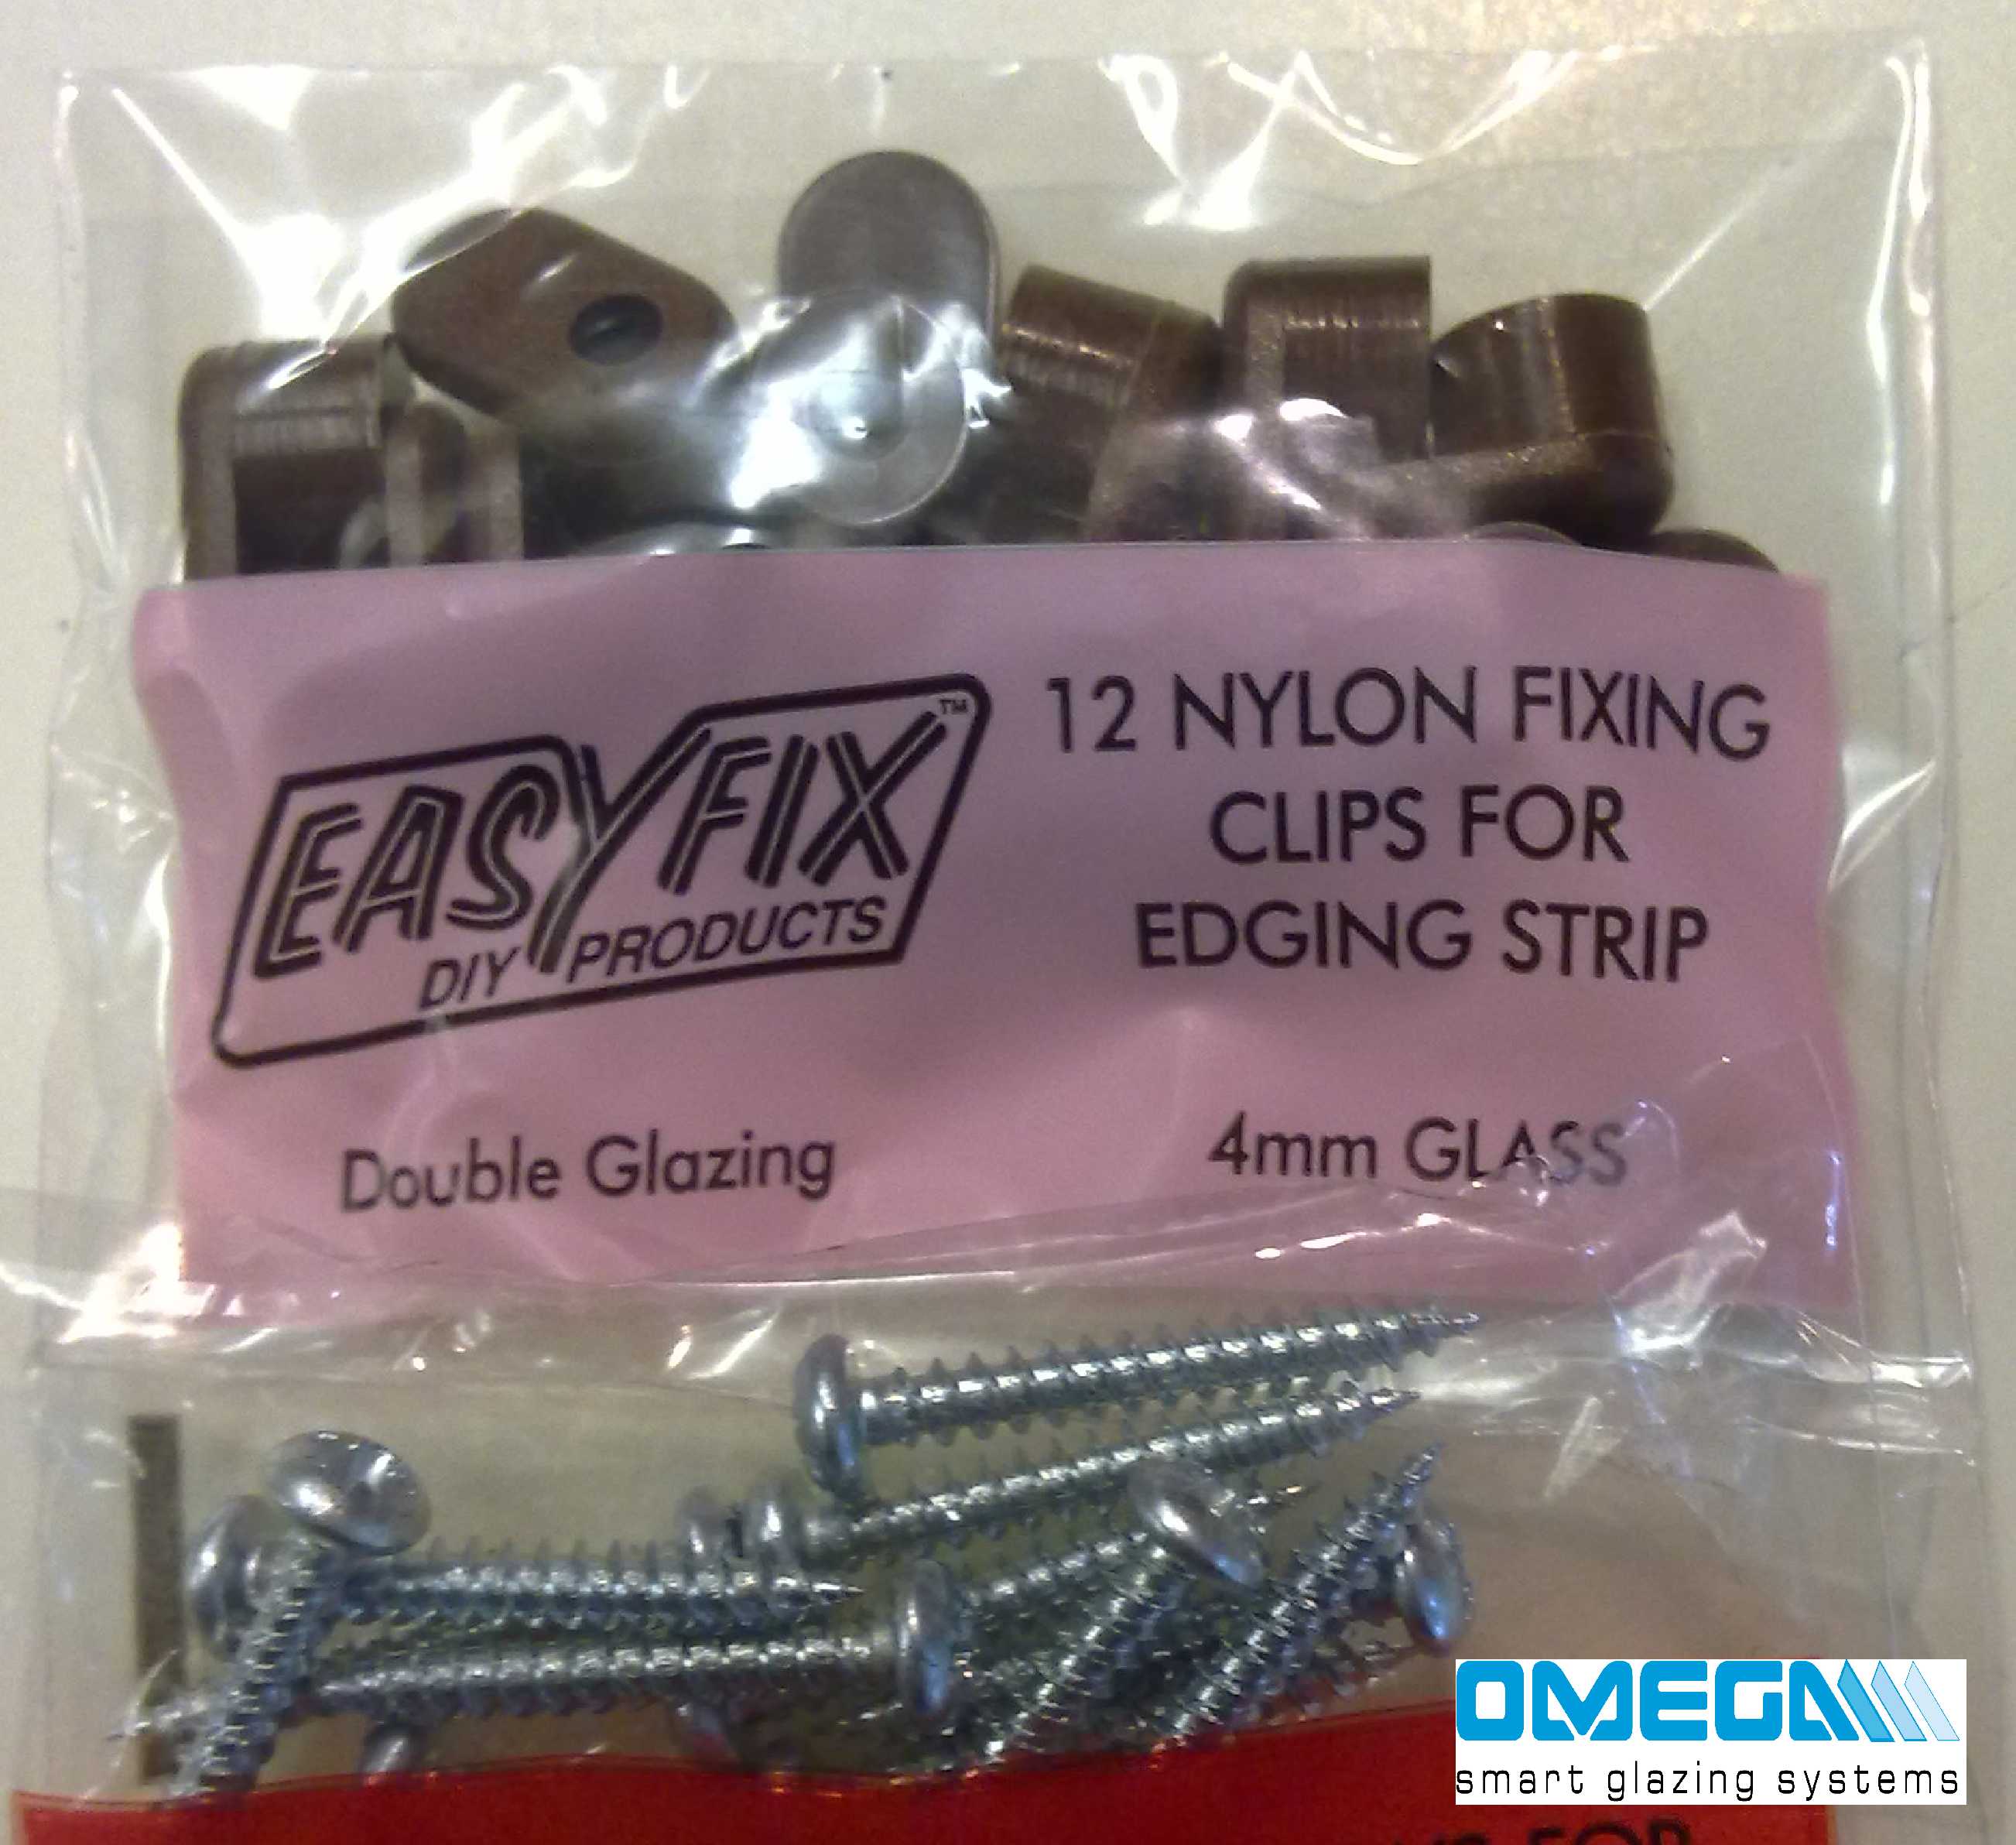 Buy Easyfix Nylon Clips - For 3mm Glazing Thickness, Brown online today